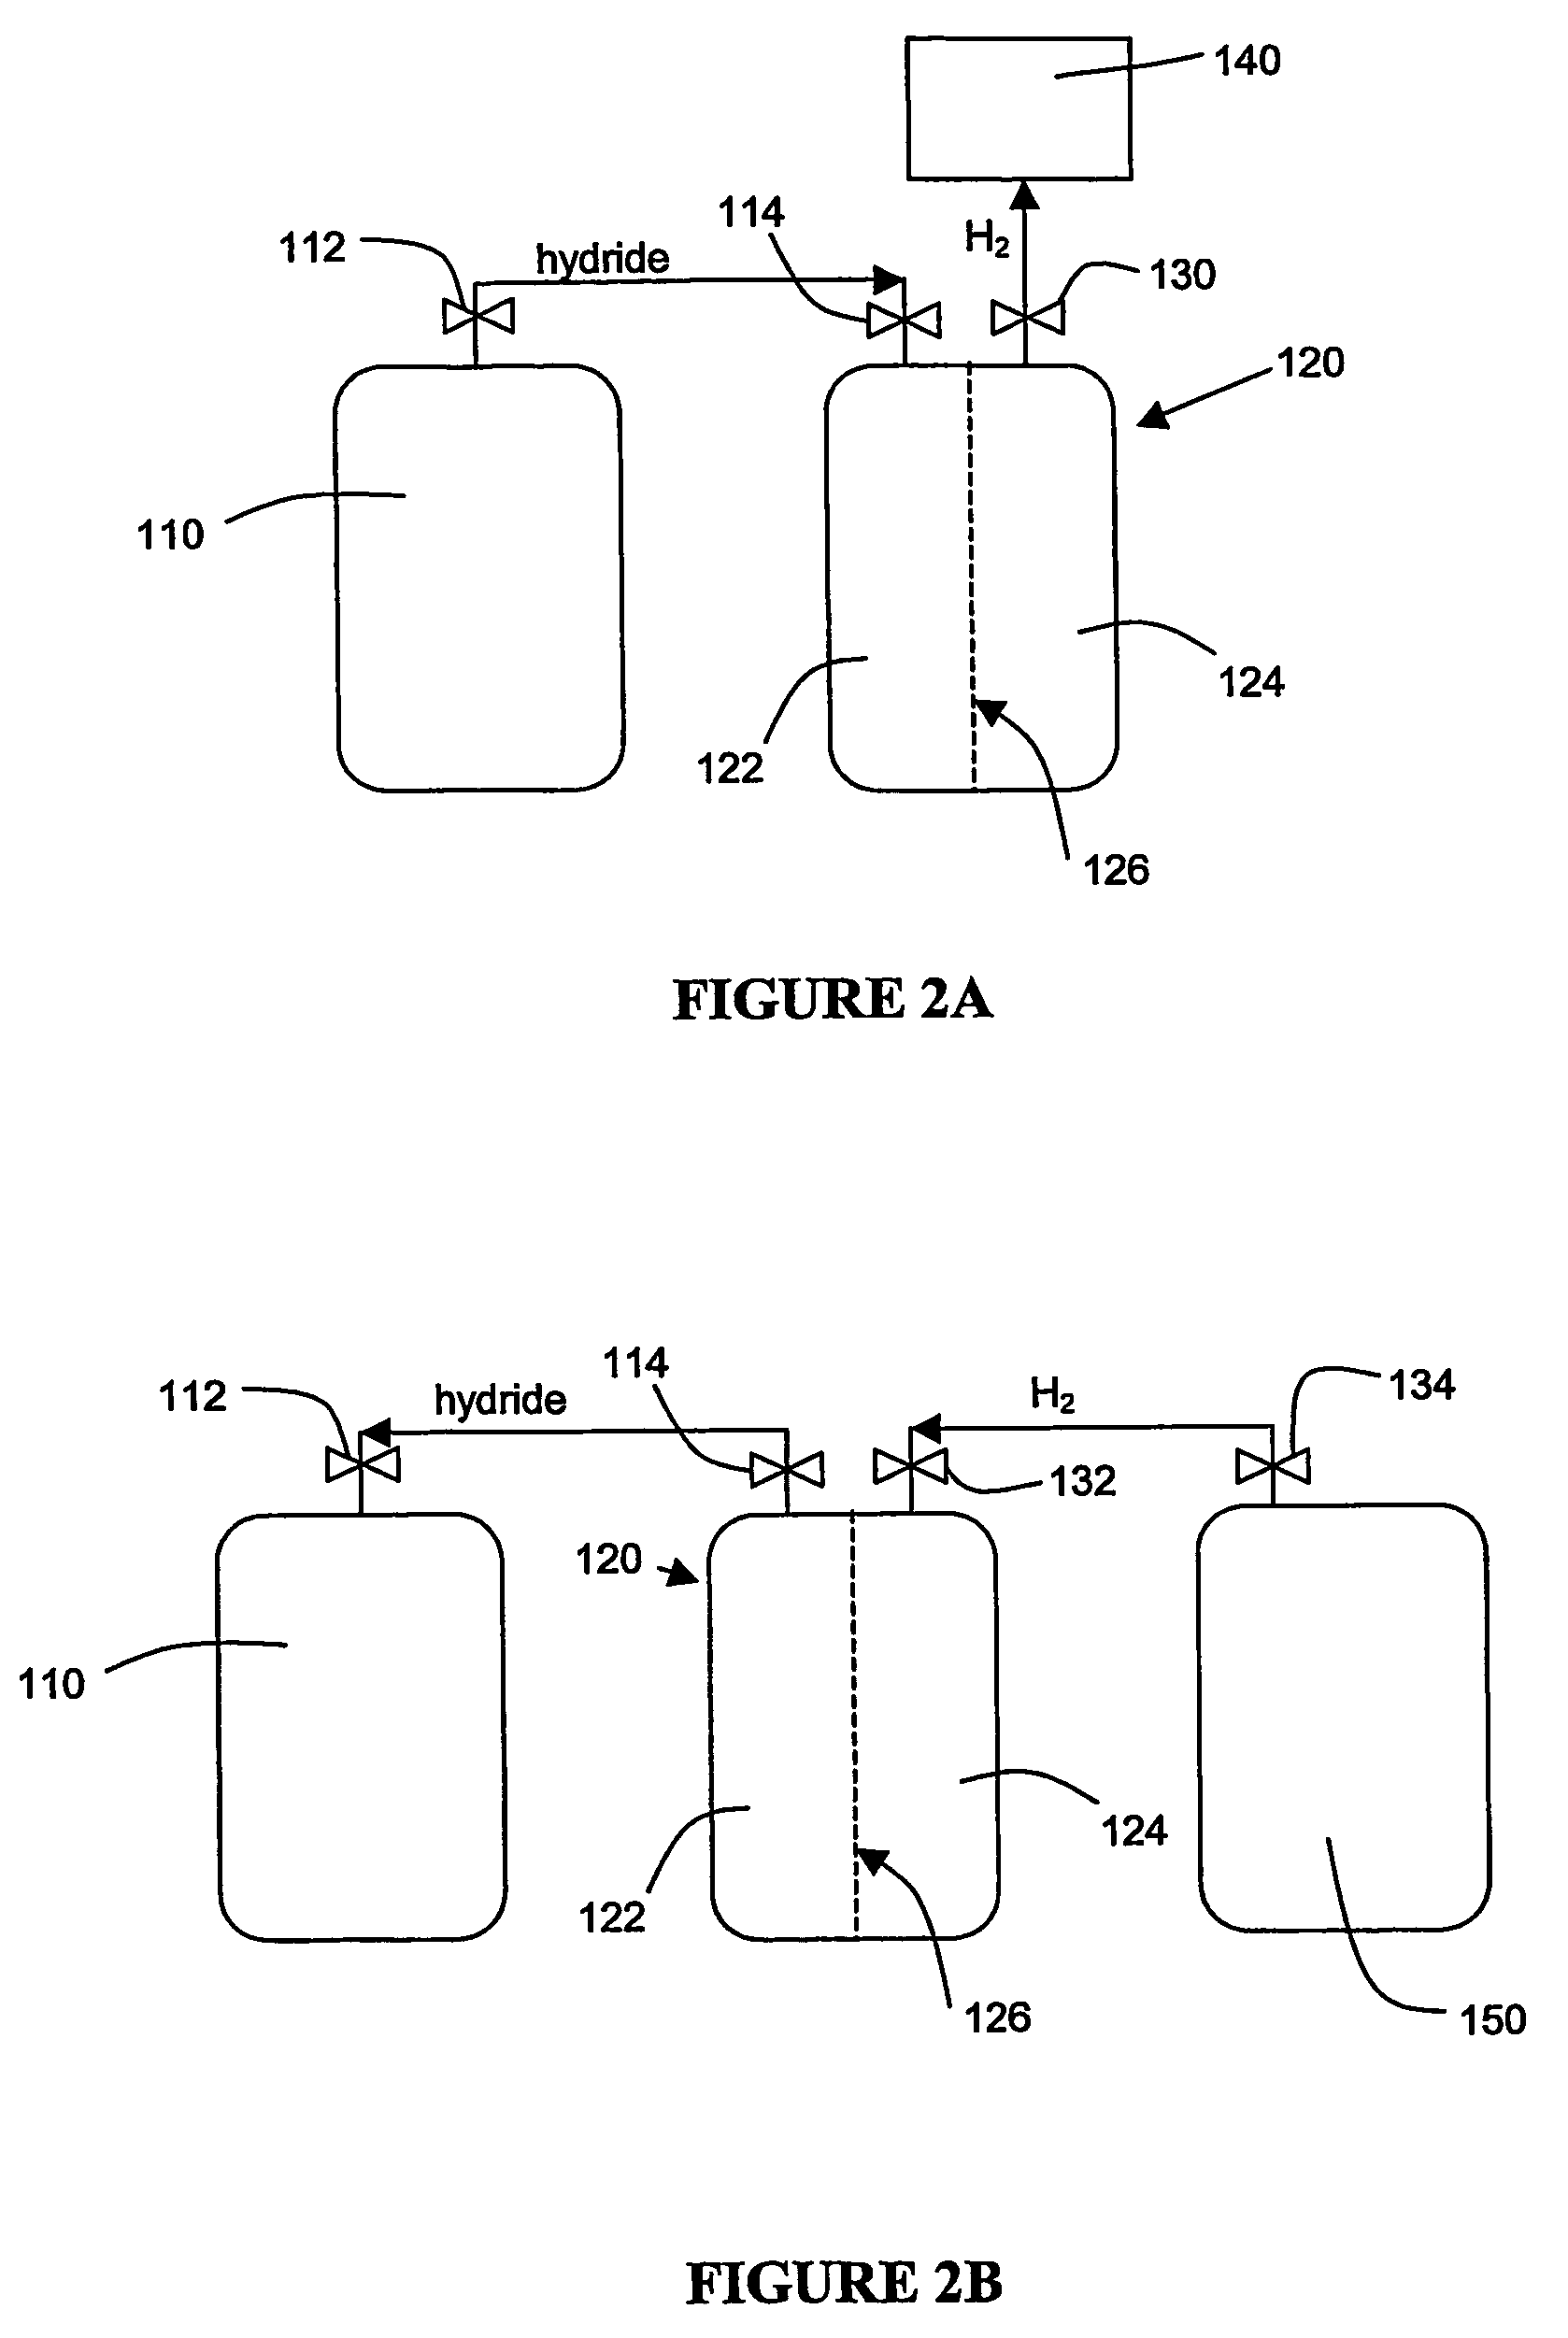 Apparatus and method for hydrogen generation from gaseous hydride